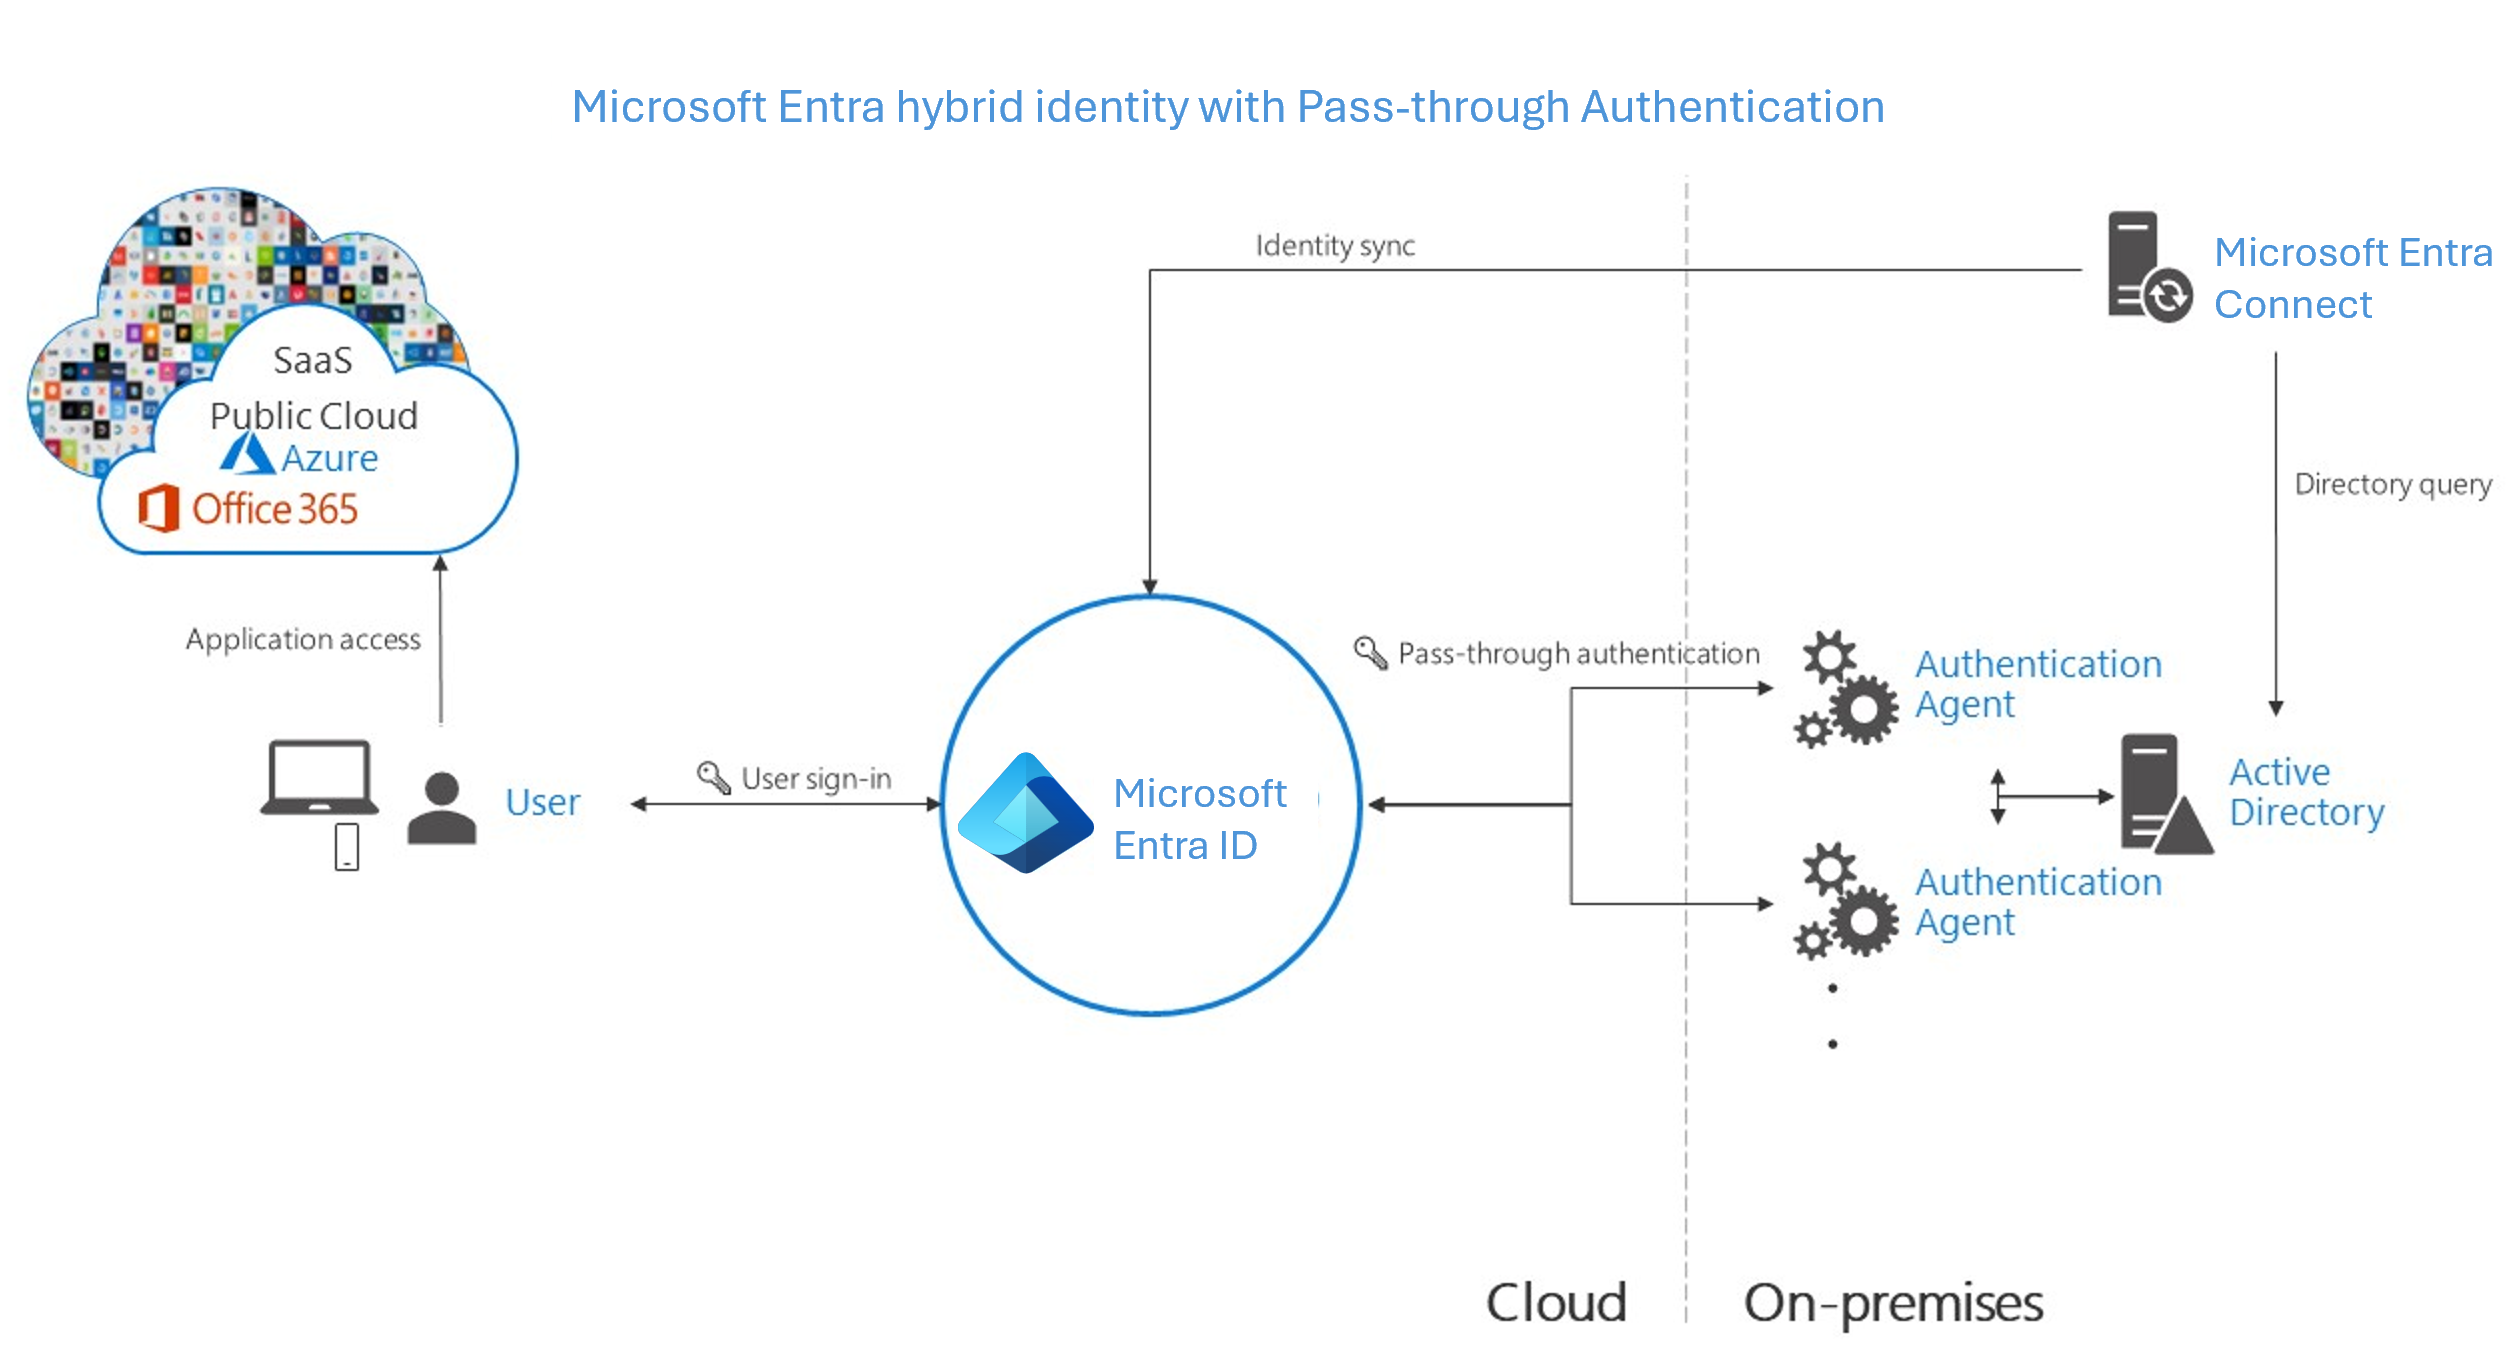 Screenshot of Microsoft Entra hybrid identity with pass-through authentication enabled.